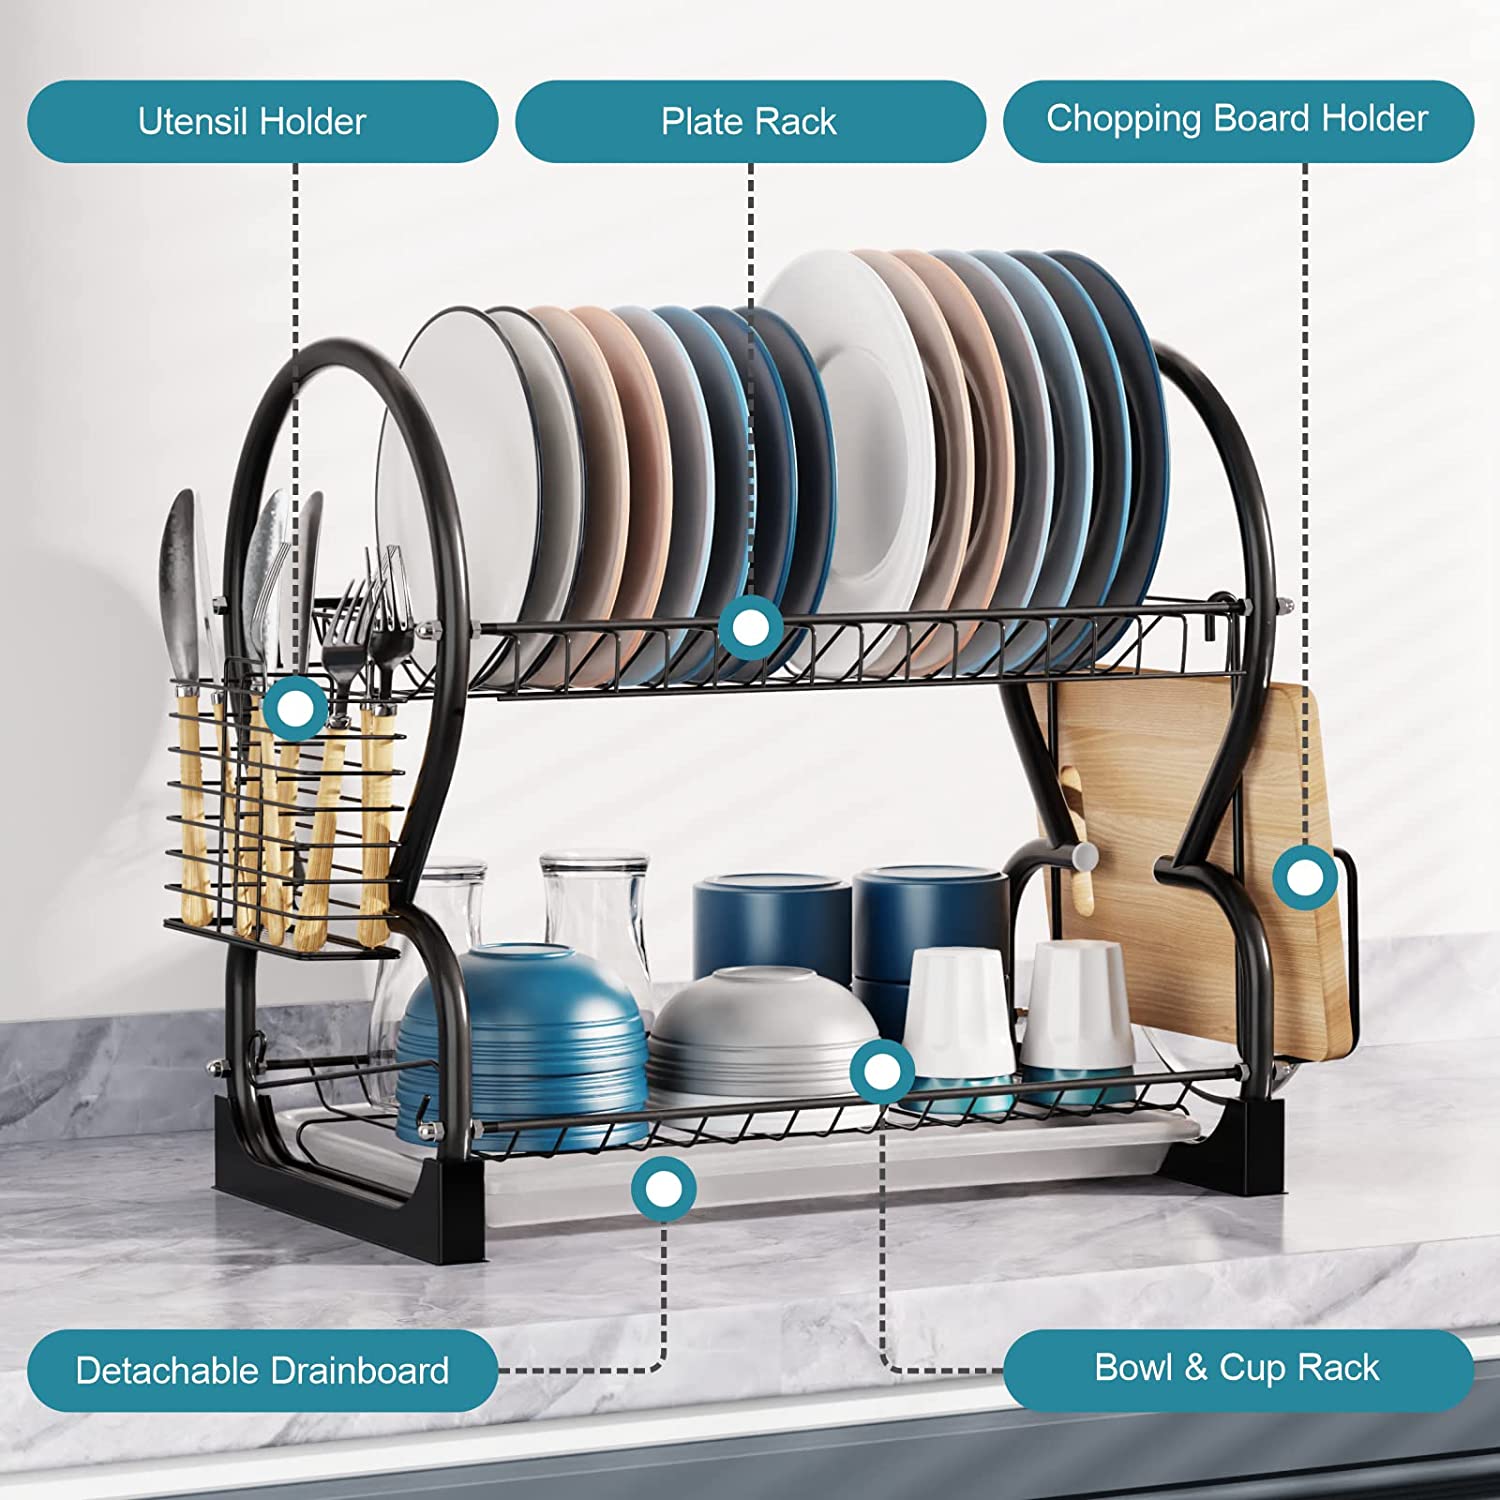 Dish Drying Rack, GSlife 2 Tier Stainless Steel Dish Rack with Utensil Holder, Cutting Board Holder and Dish Drainer for Kitchen Counter, Black.